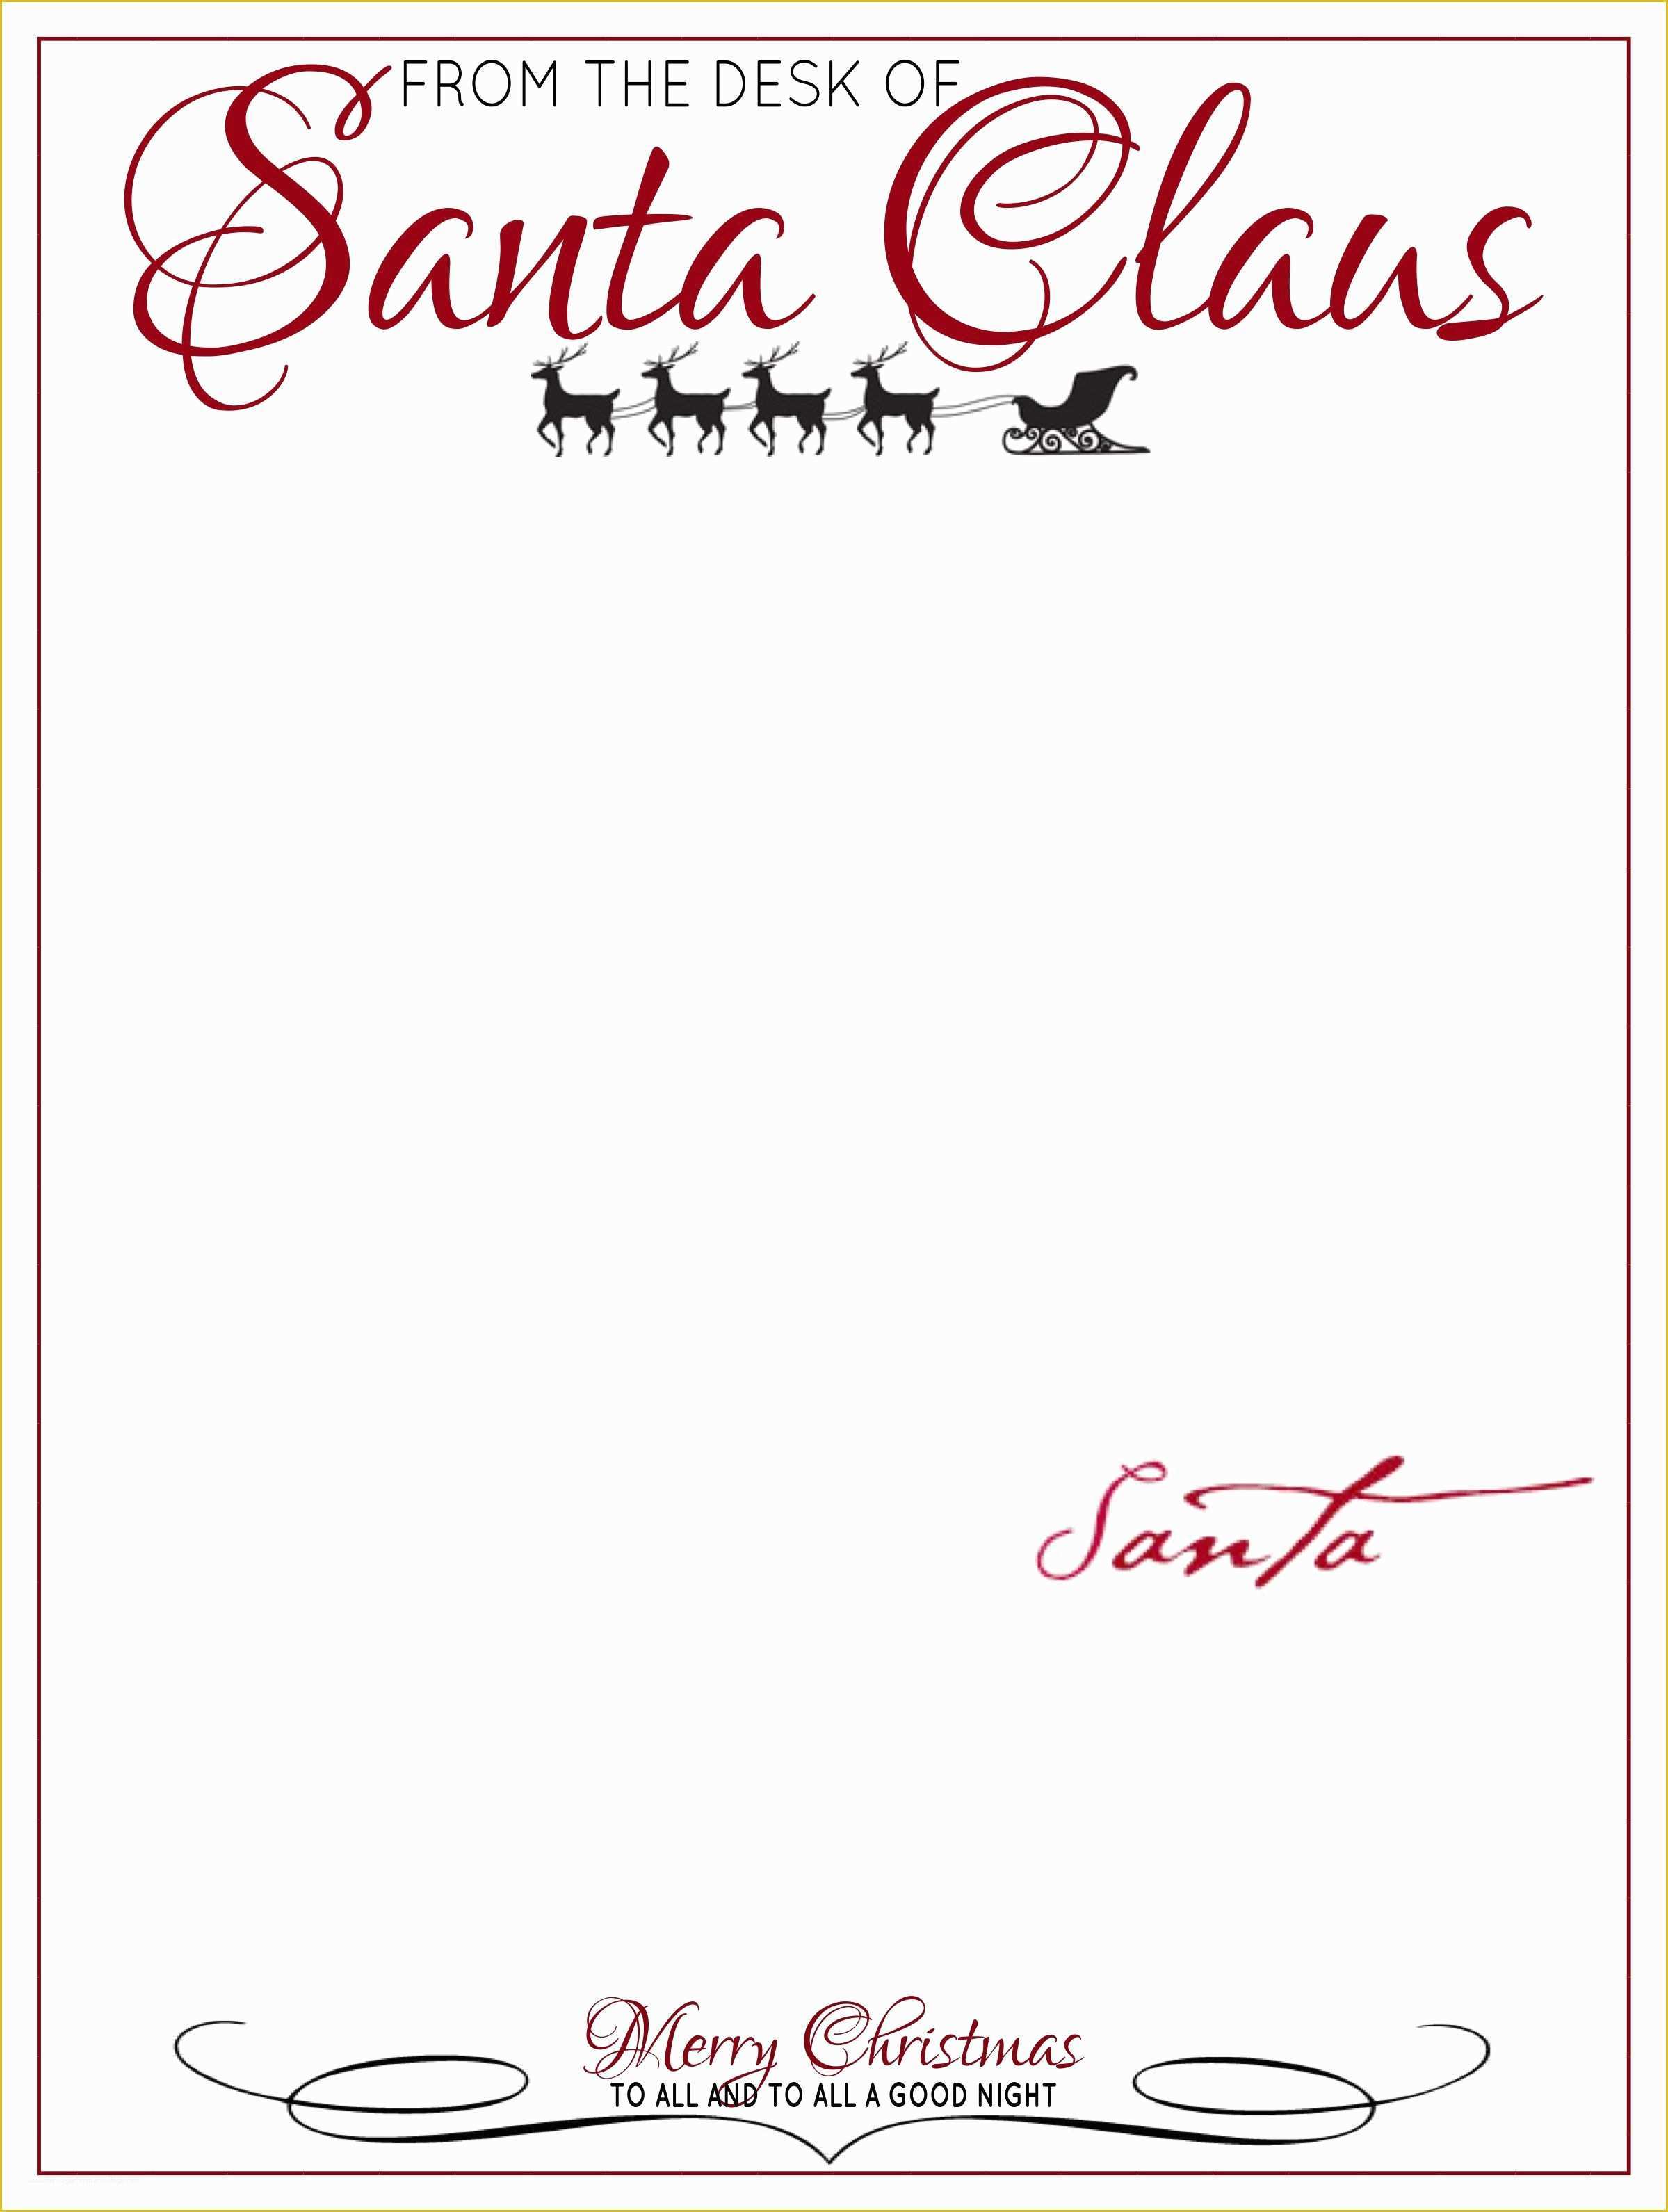 Free Letter From Santa Template Word Of Free Printable Letter From Santa Template Word Download